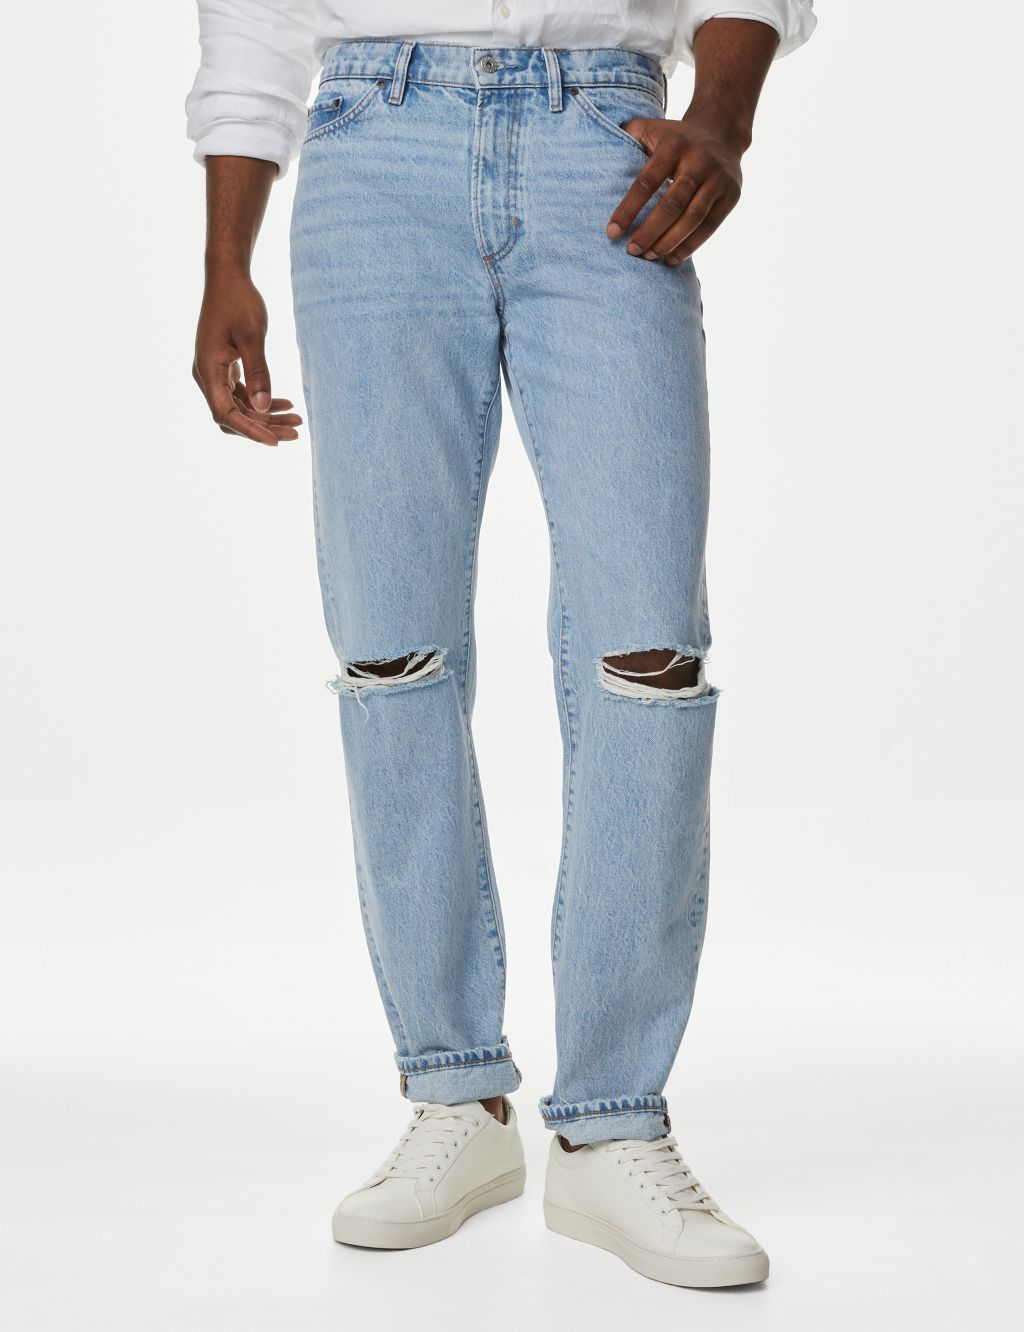 Straight Fit Pure Cotton Ripped Jeans image 1